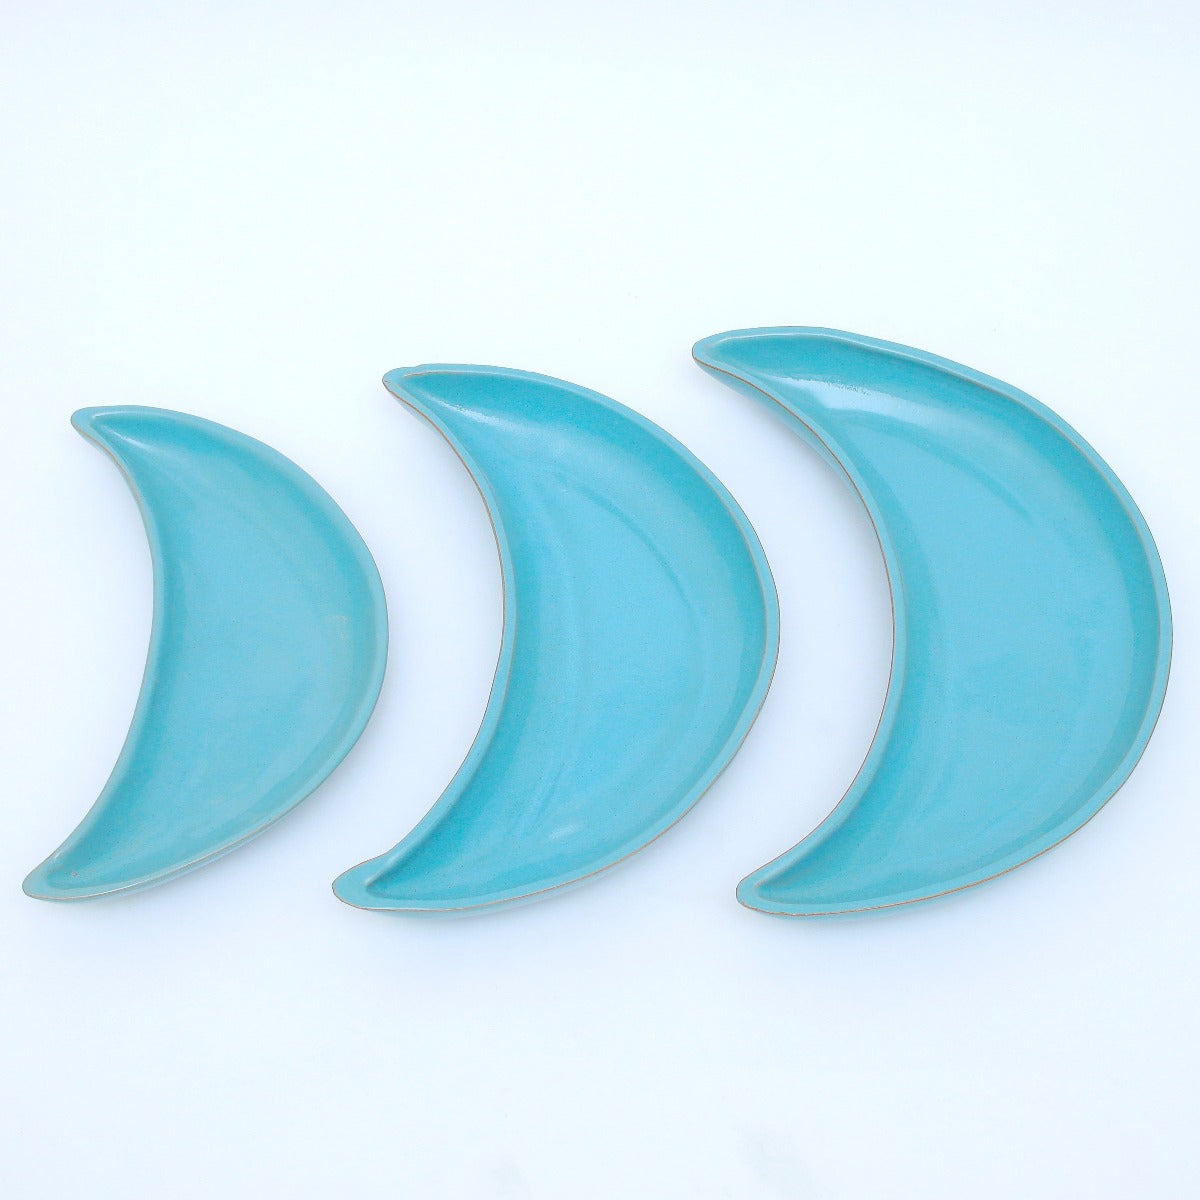 Crescent Plate Set of 3